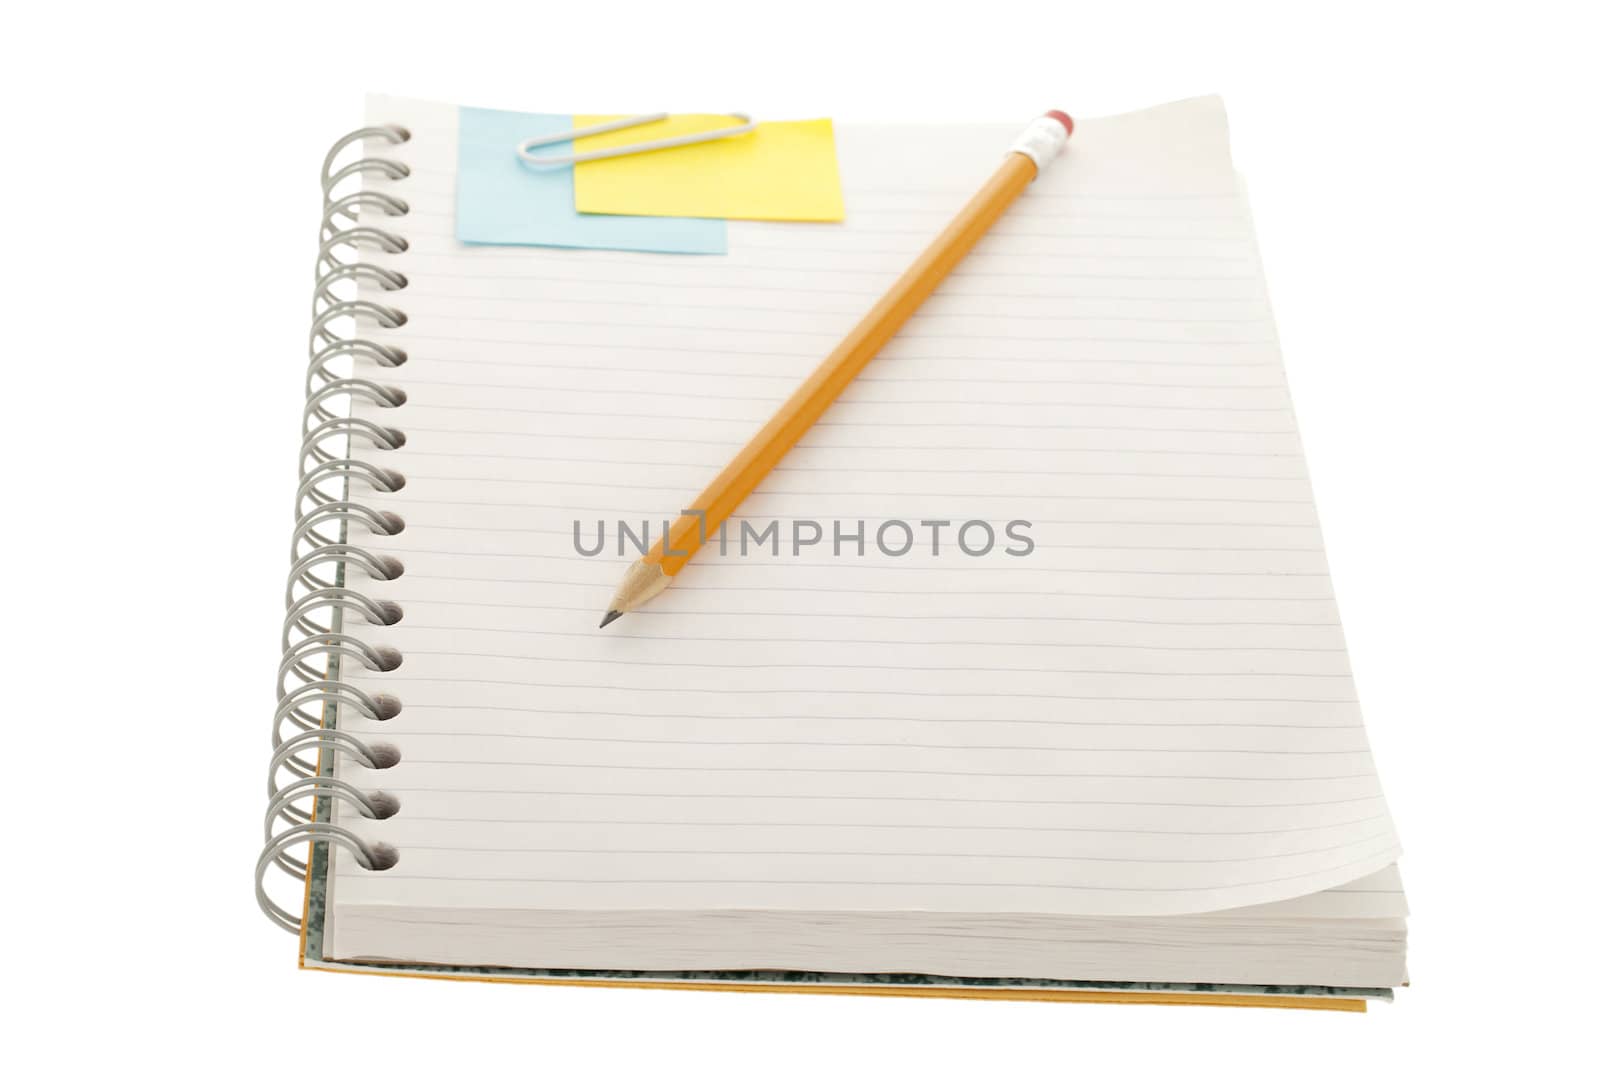 Notebook with adhesive note, paper clip and pencil in a close-up image